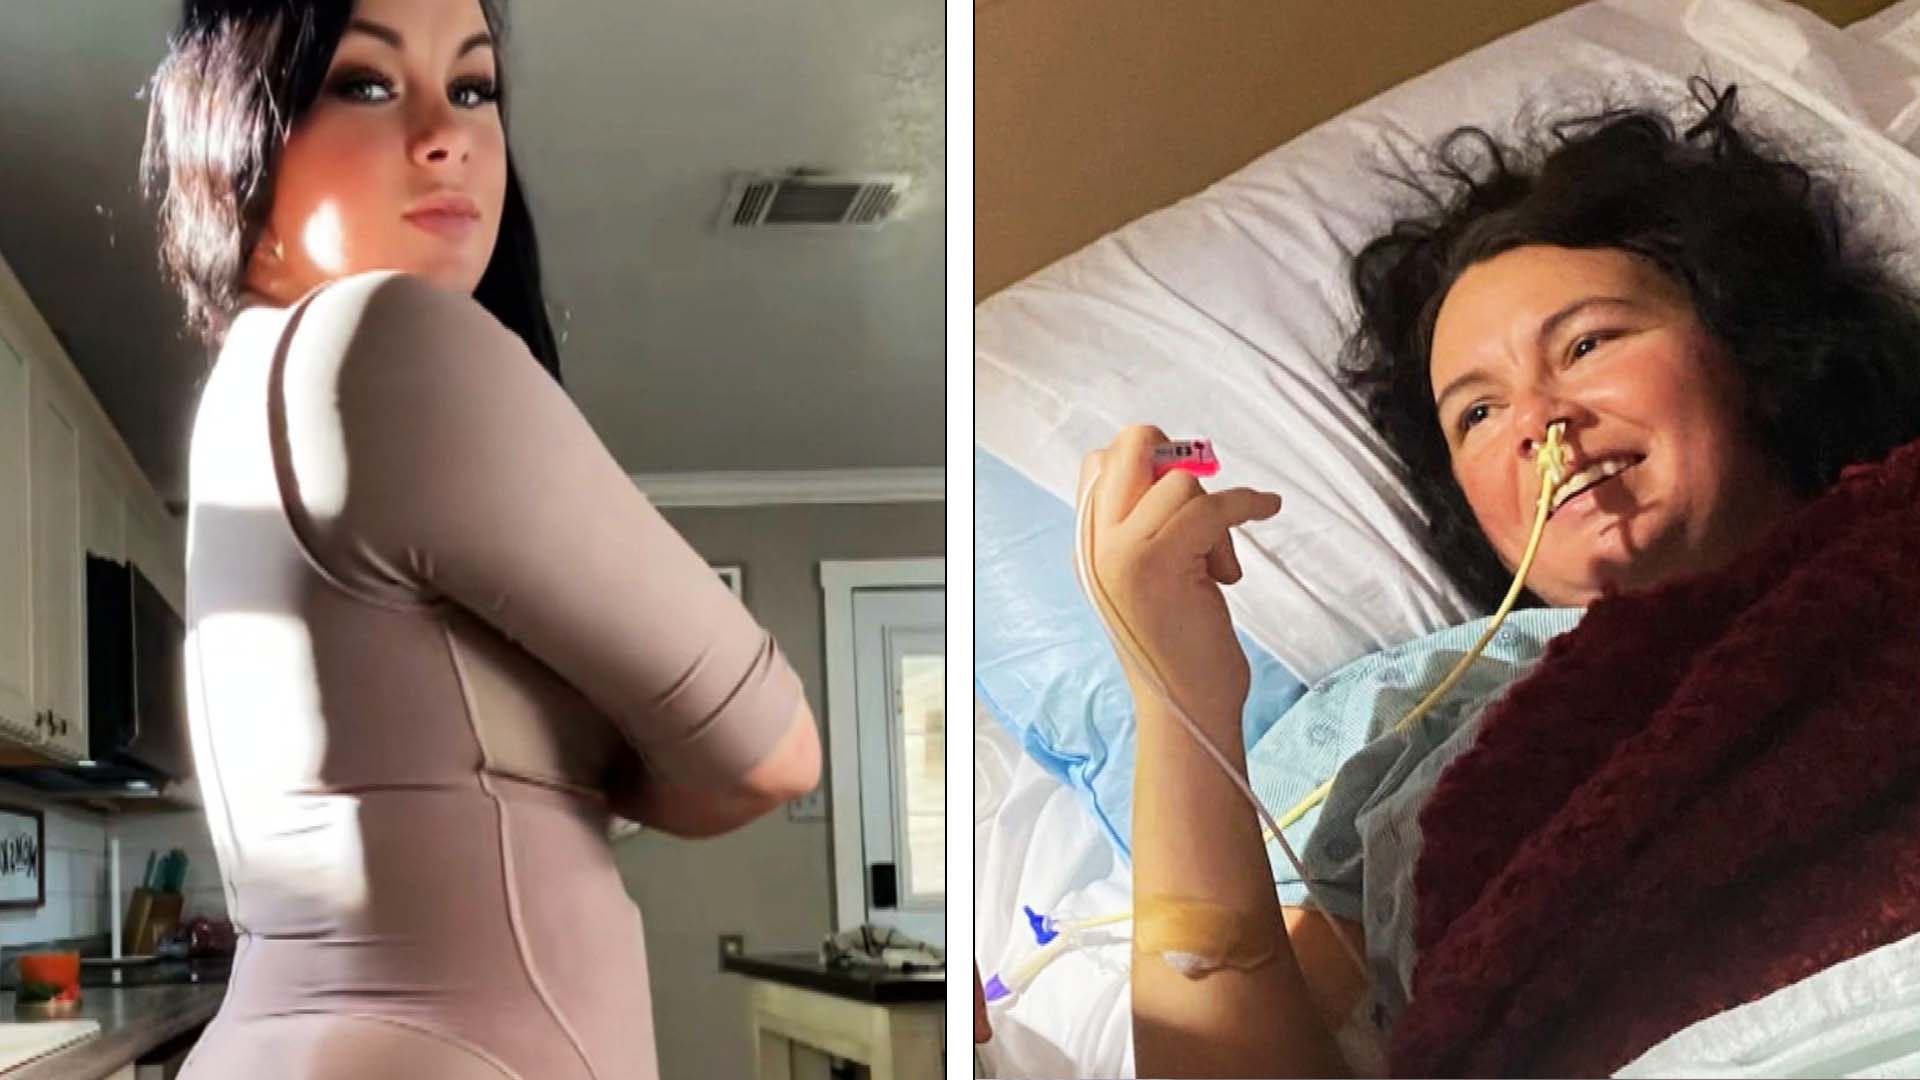 Woman's nipples die and fall off after botched plastic surgery